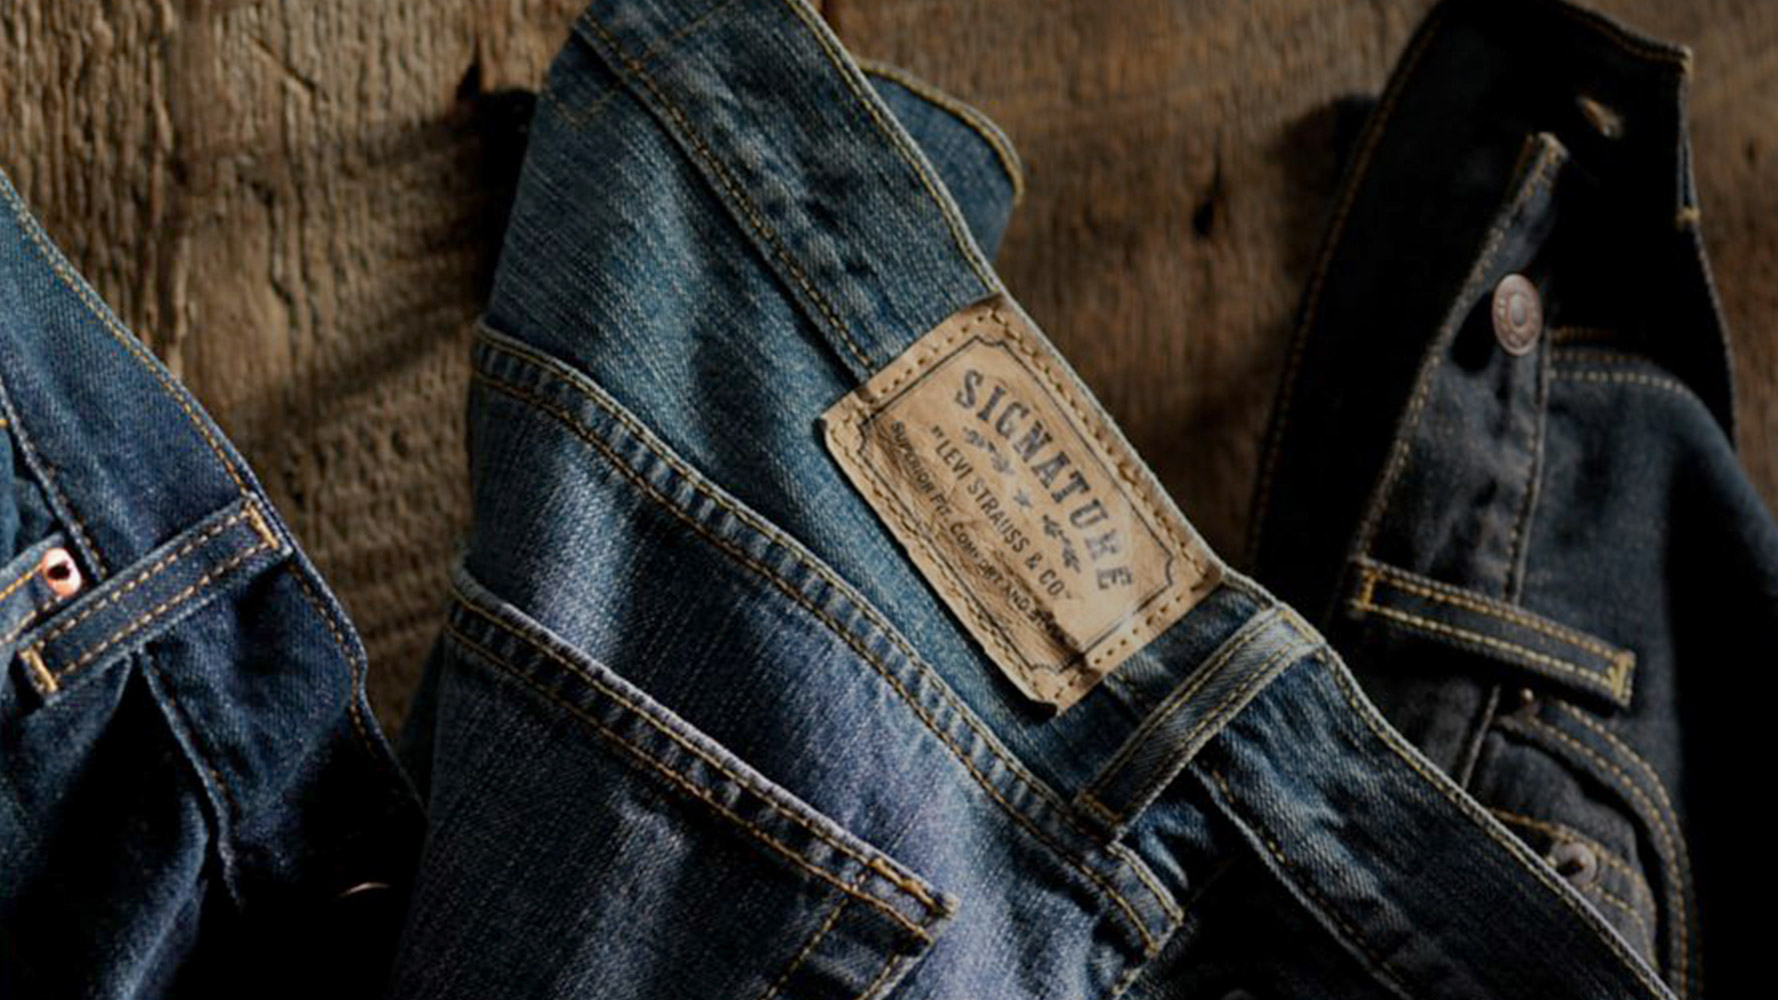 Siblings Ridiculous Classic Levis History - Levi Strauss & Co : Levi Strauss & Co